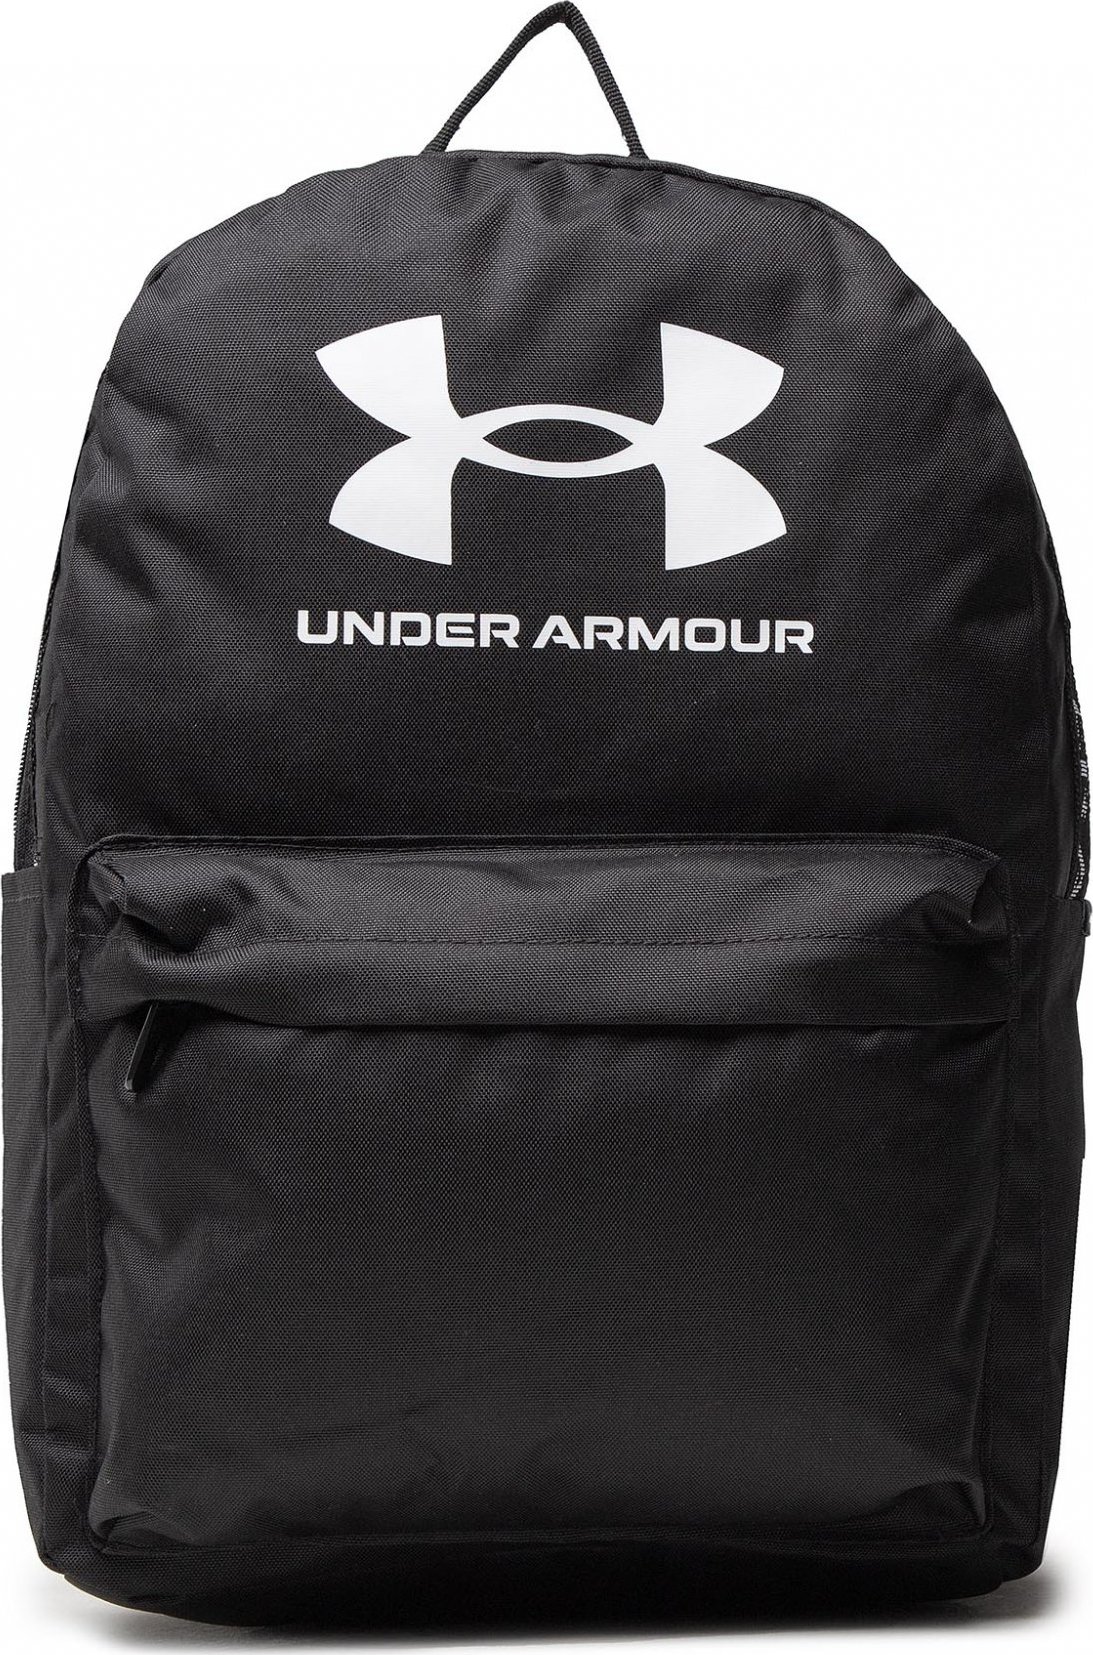 Under Armour Loudon Backpack 1364186001-001